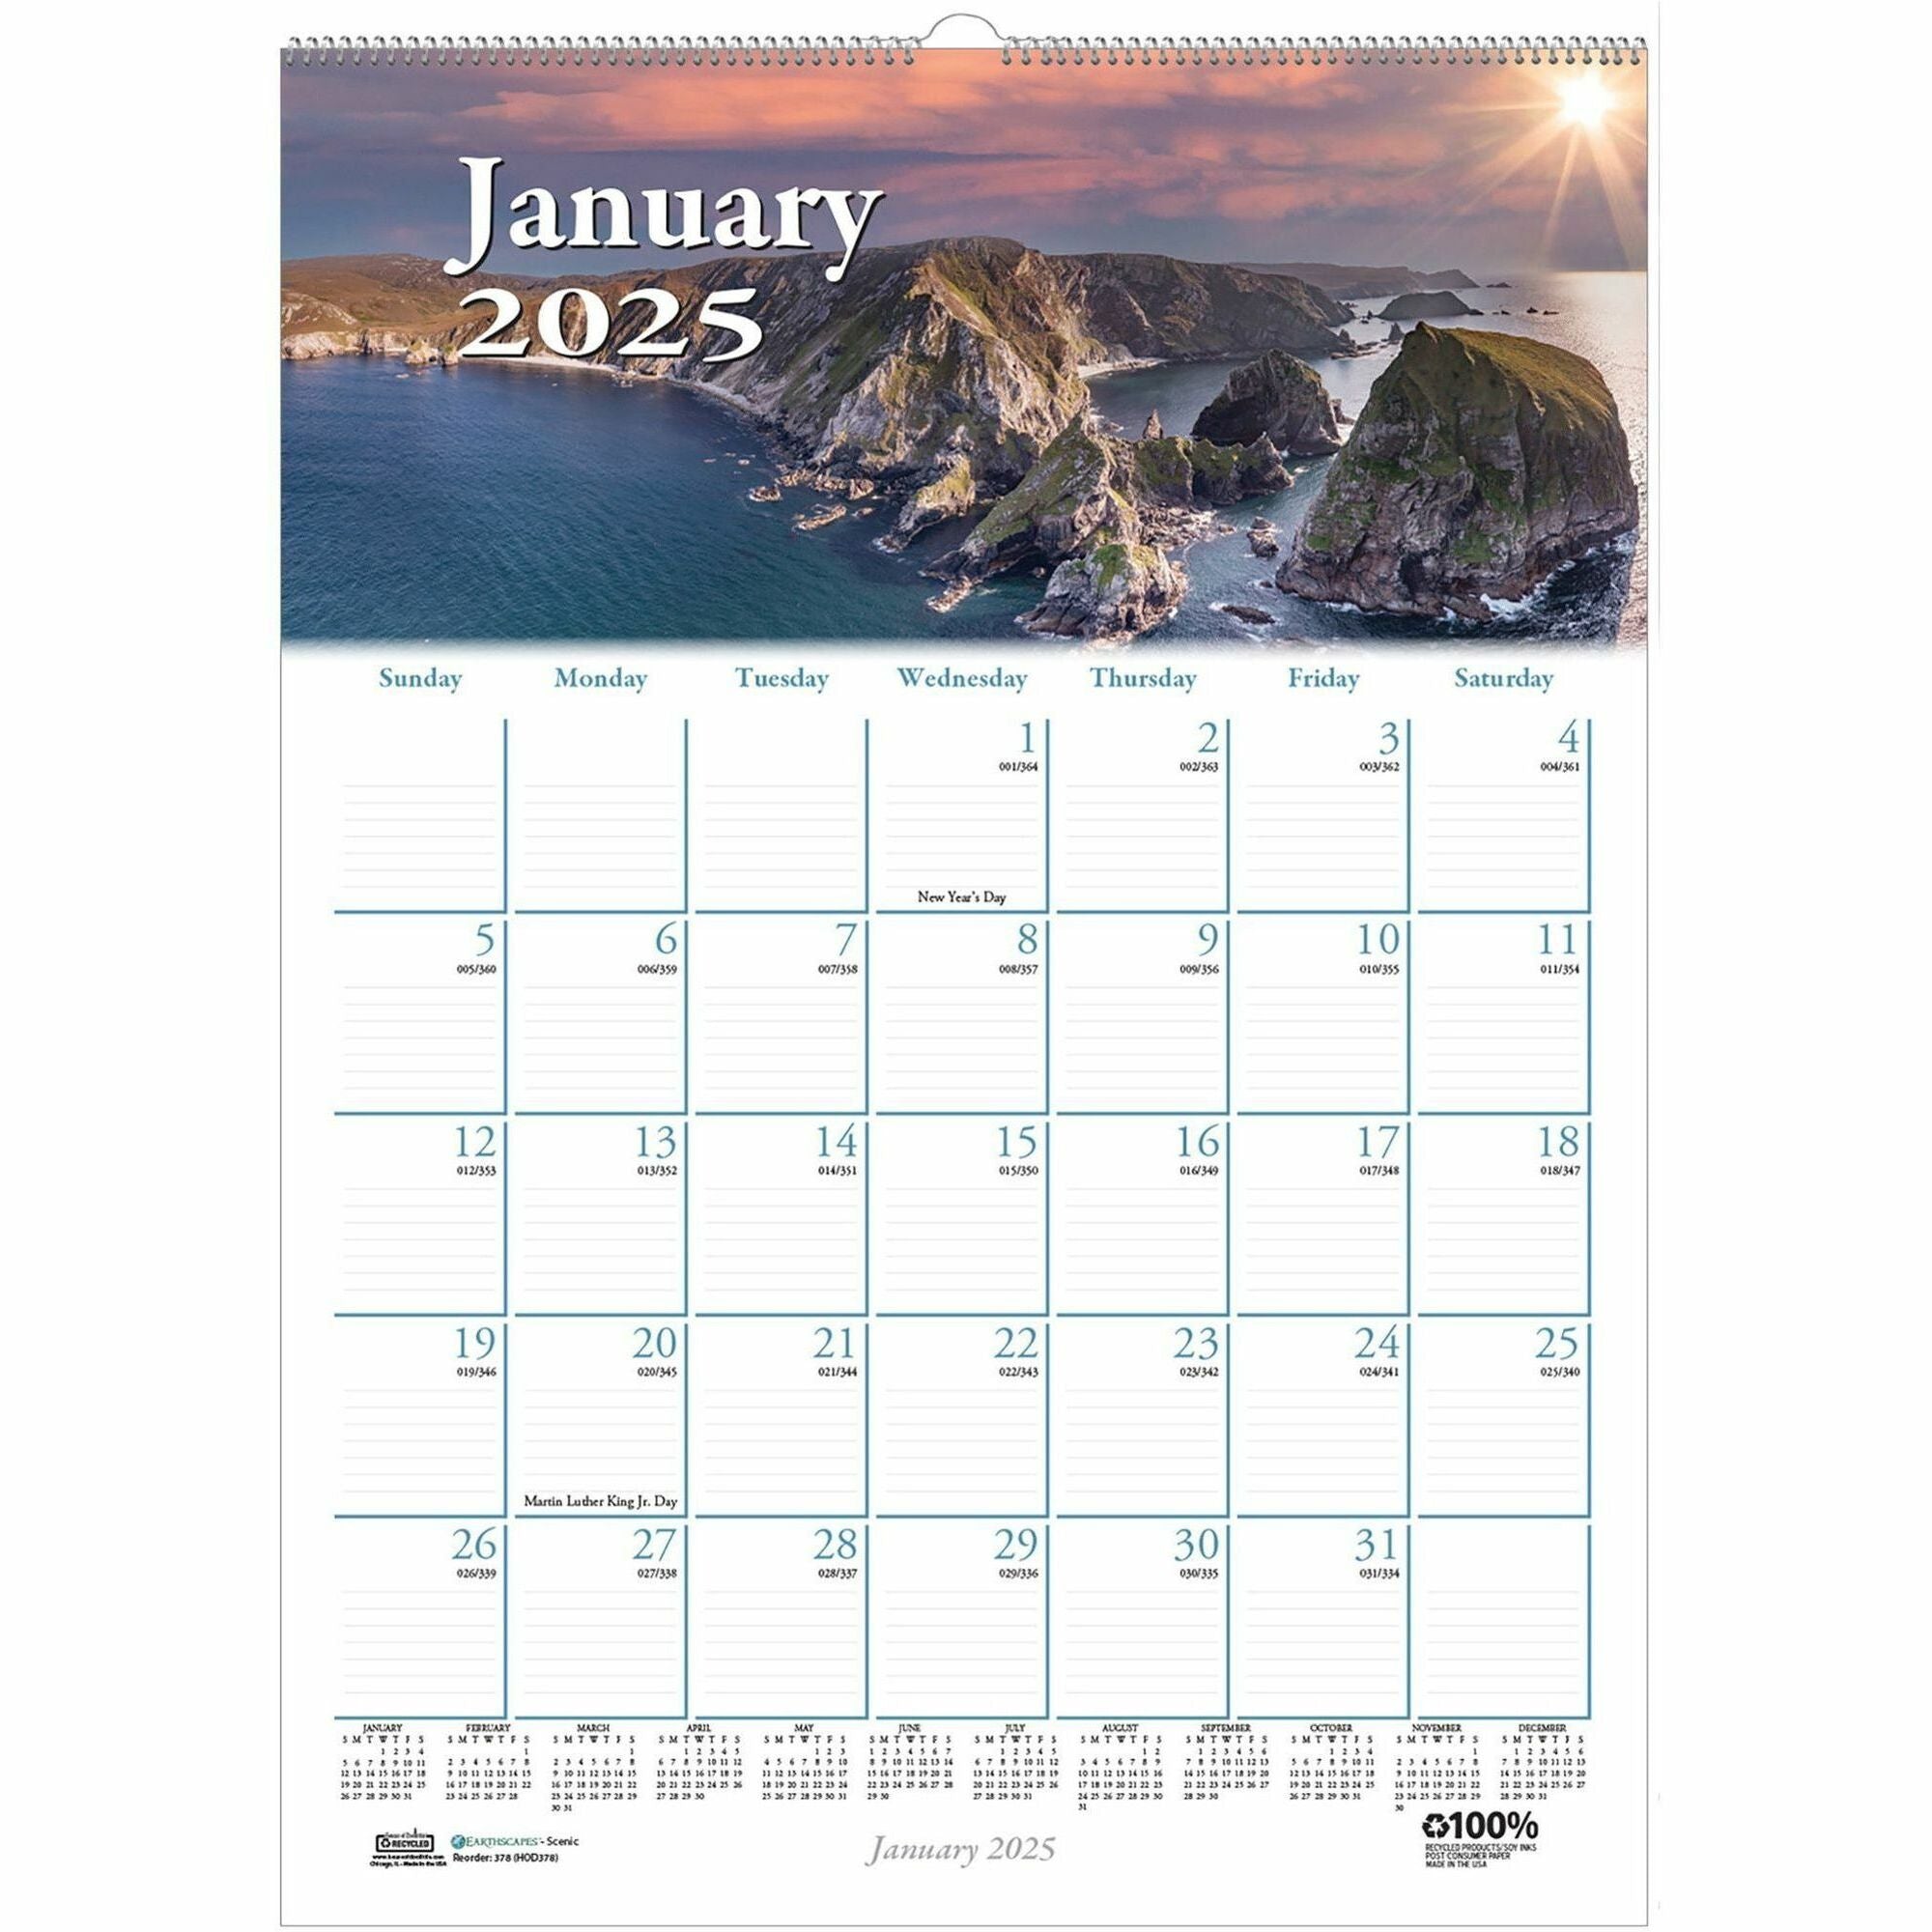 house-of-doolittle-earthscapes-scenic-wall-calendars-julian-dates-monthly-1-year-january-2024-december-2024-1-month-single-page-layout-12-x-16-1-2-sheet-size-2-x-163-block-wire-bound-white-paper-reference-calendar-hangin_hod378 - 1